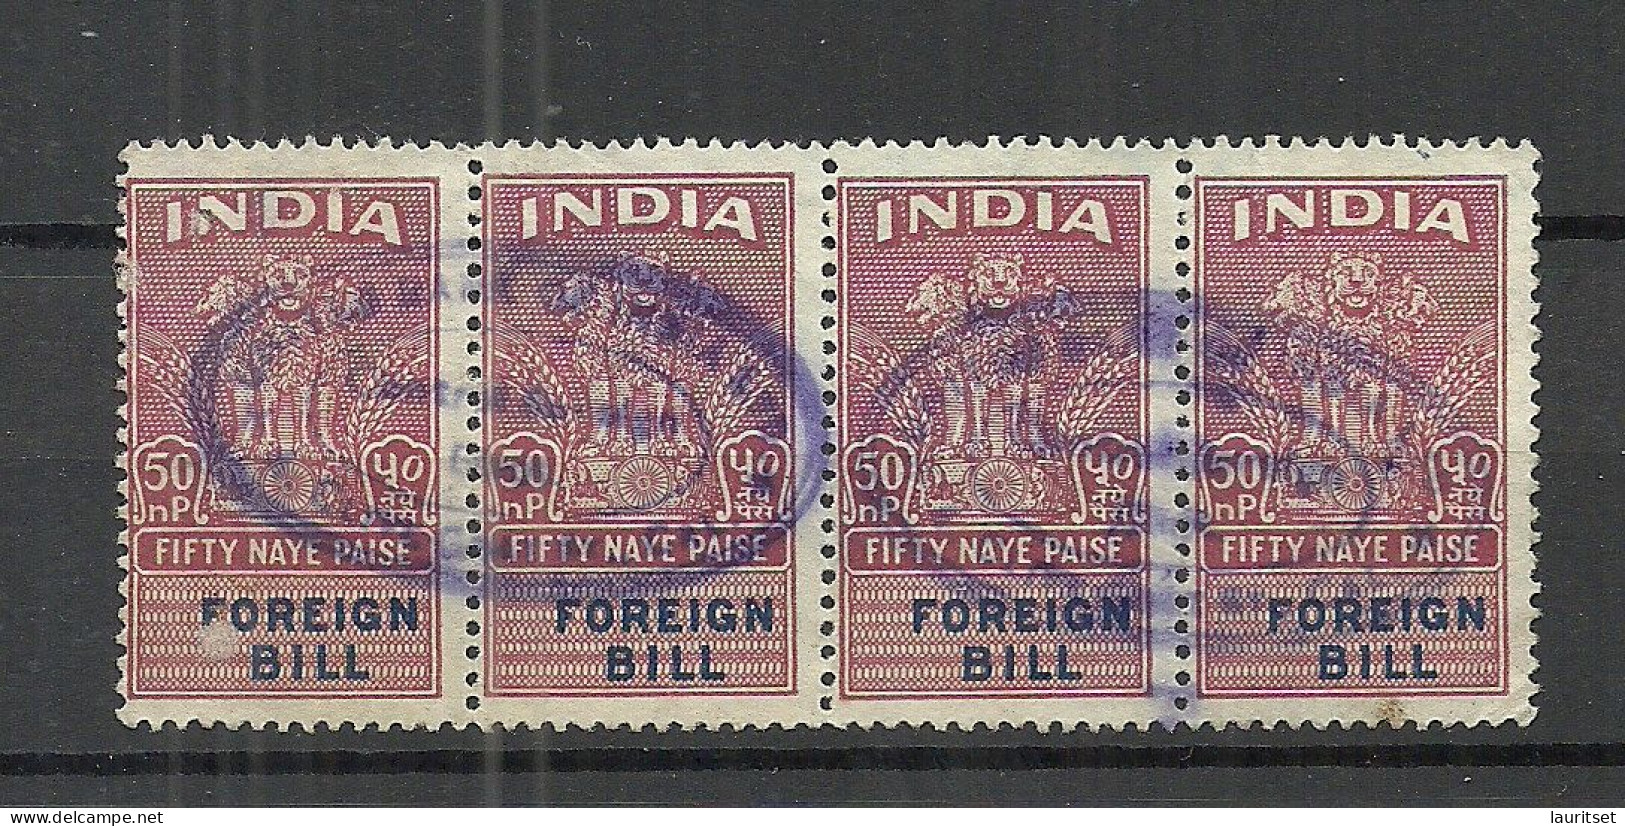 INDIA Foreign Bill Revenue Tax 50 NP As 4-stripe O - Official Stamps